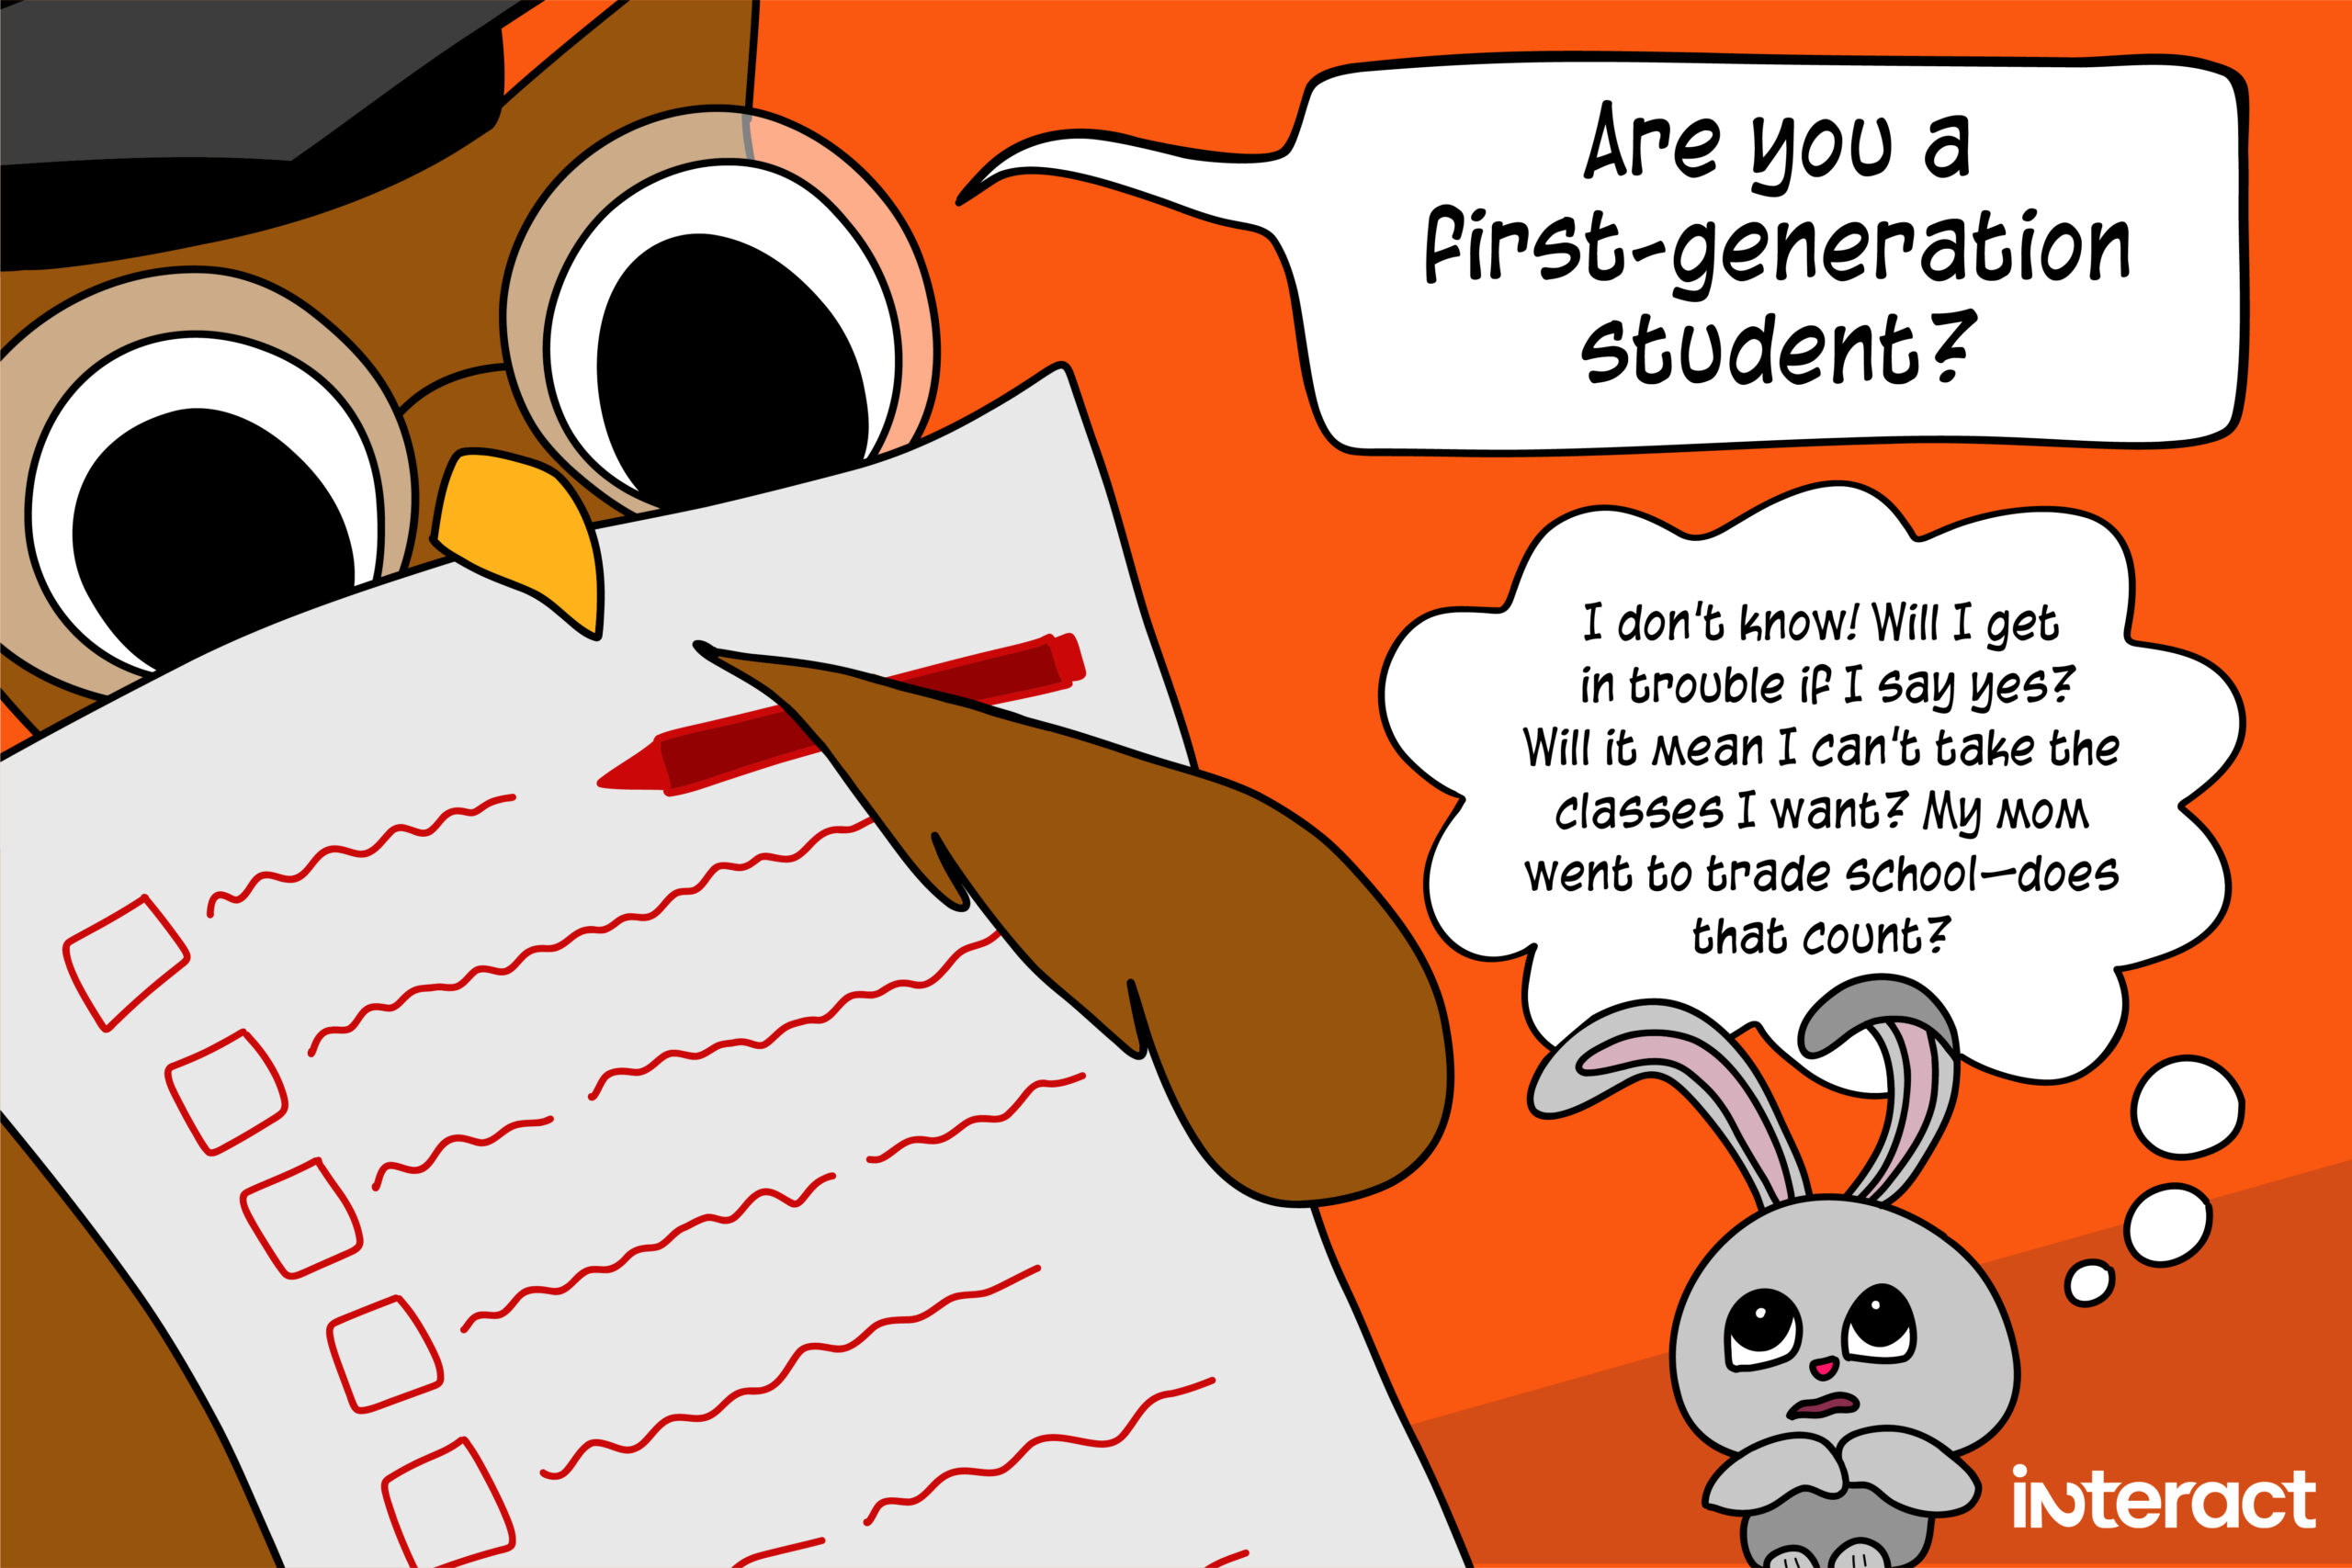 A cartoon that shows the damaging effects of academic jargon. Owl teacher holds a red pen and a paper form with checkboxes. Speech bubble: “Are you a first-generation student?” A young bunny student, looking terrified. Thought bubbles: I don’t know! Will I get in trouble if I say yes? Will it mean I can’t take the classes I want? My mom went to trade school—does that count?